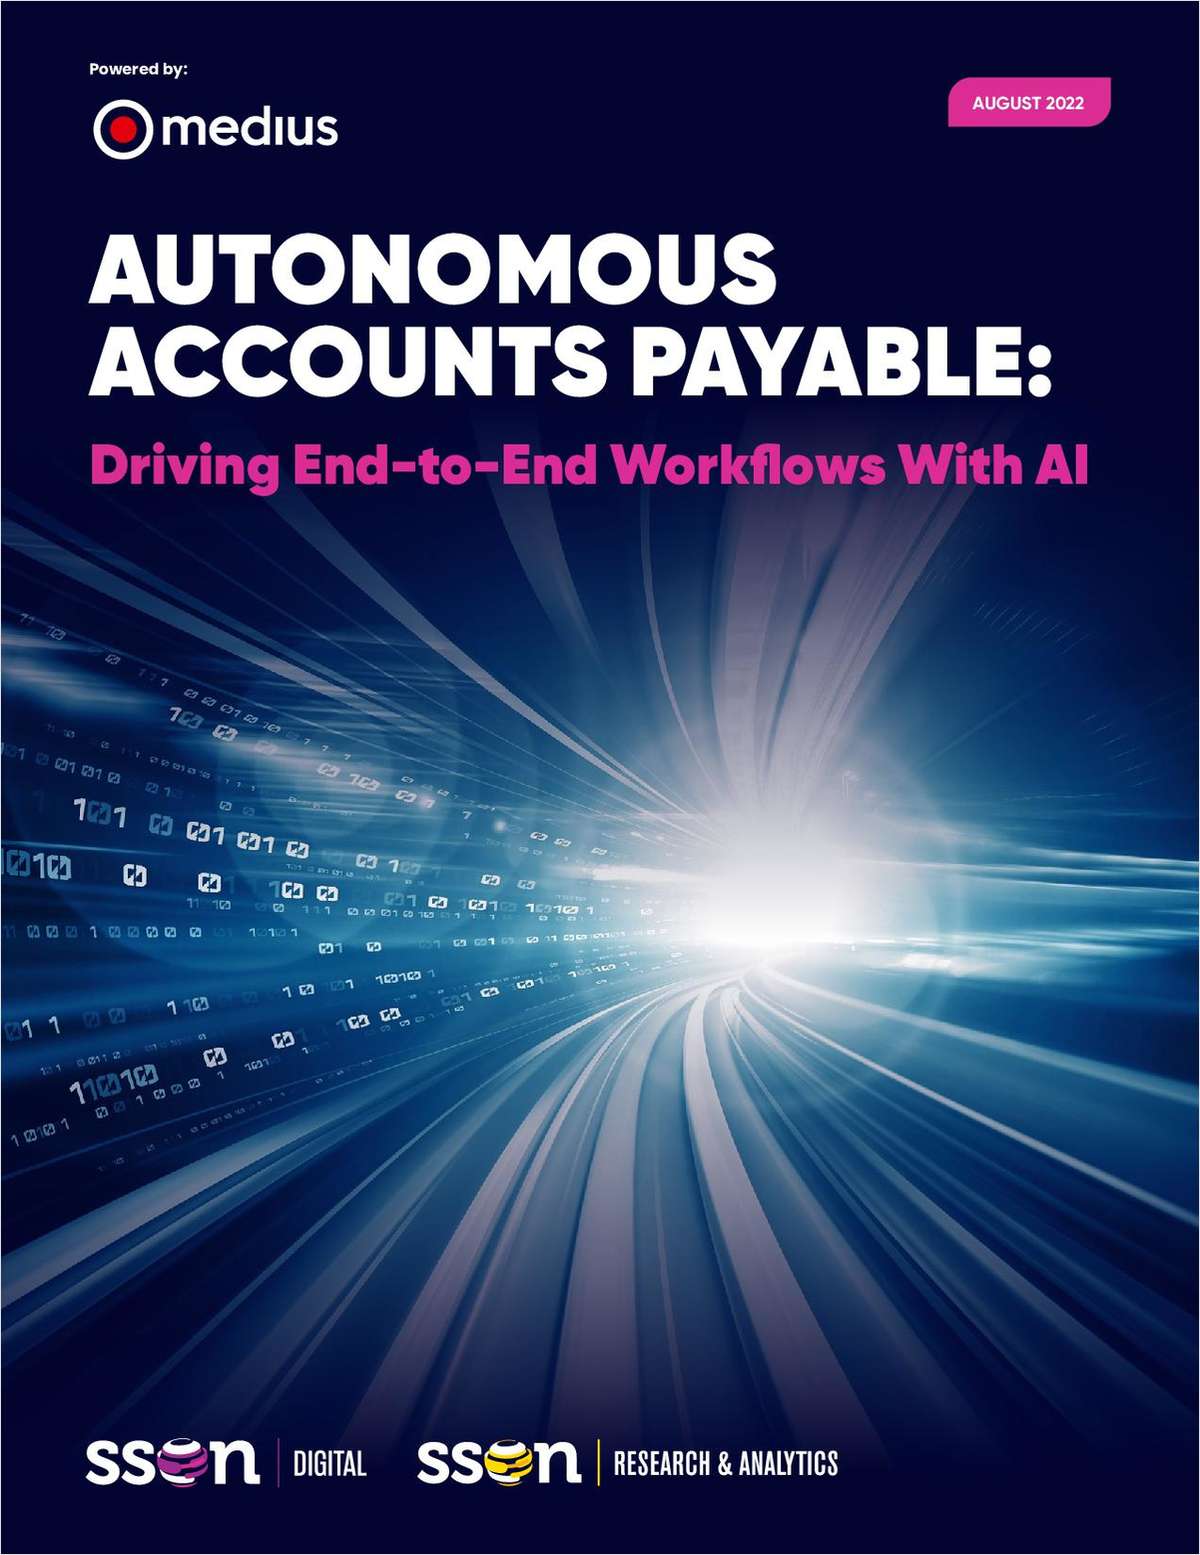 Autonomous Accounts Payable: Driving end-to-end workflows with AI